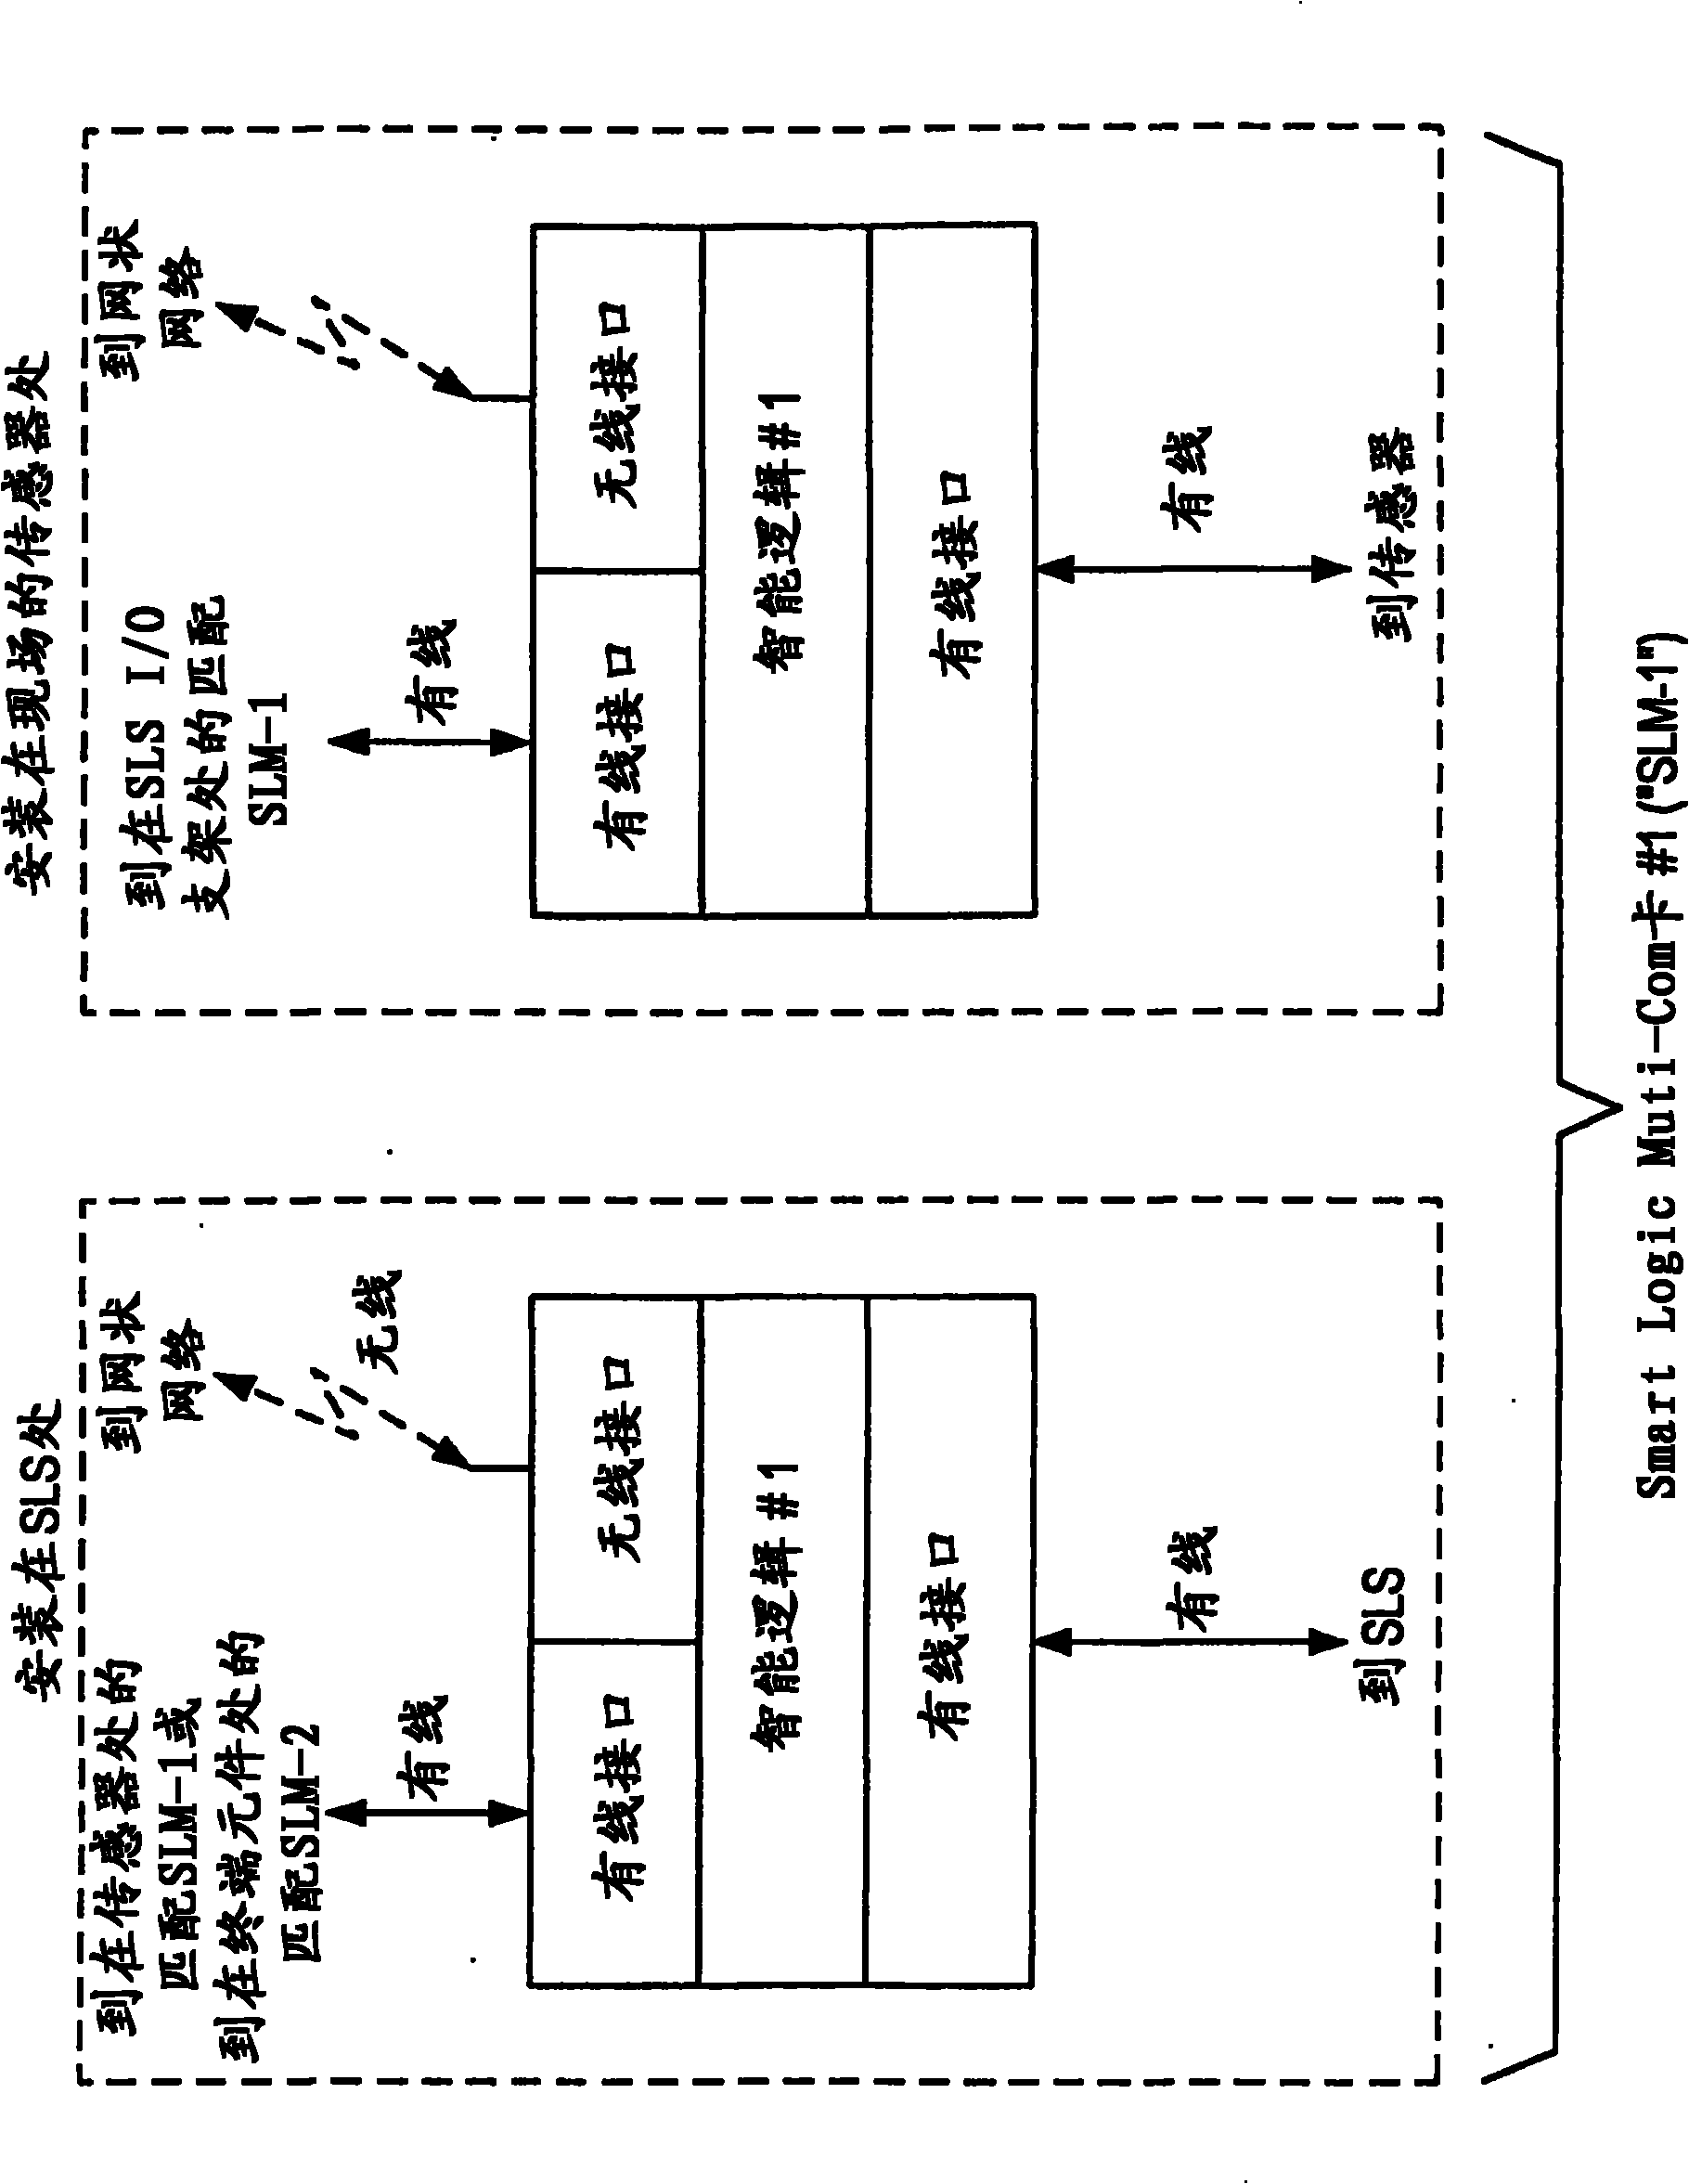 Distributed and adaptive smart logic with multi-communication apparatus for reliable safety system shutdown